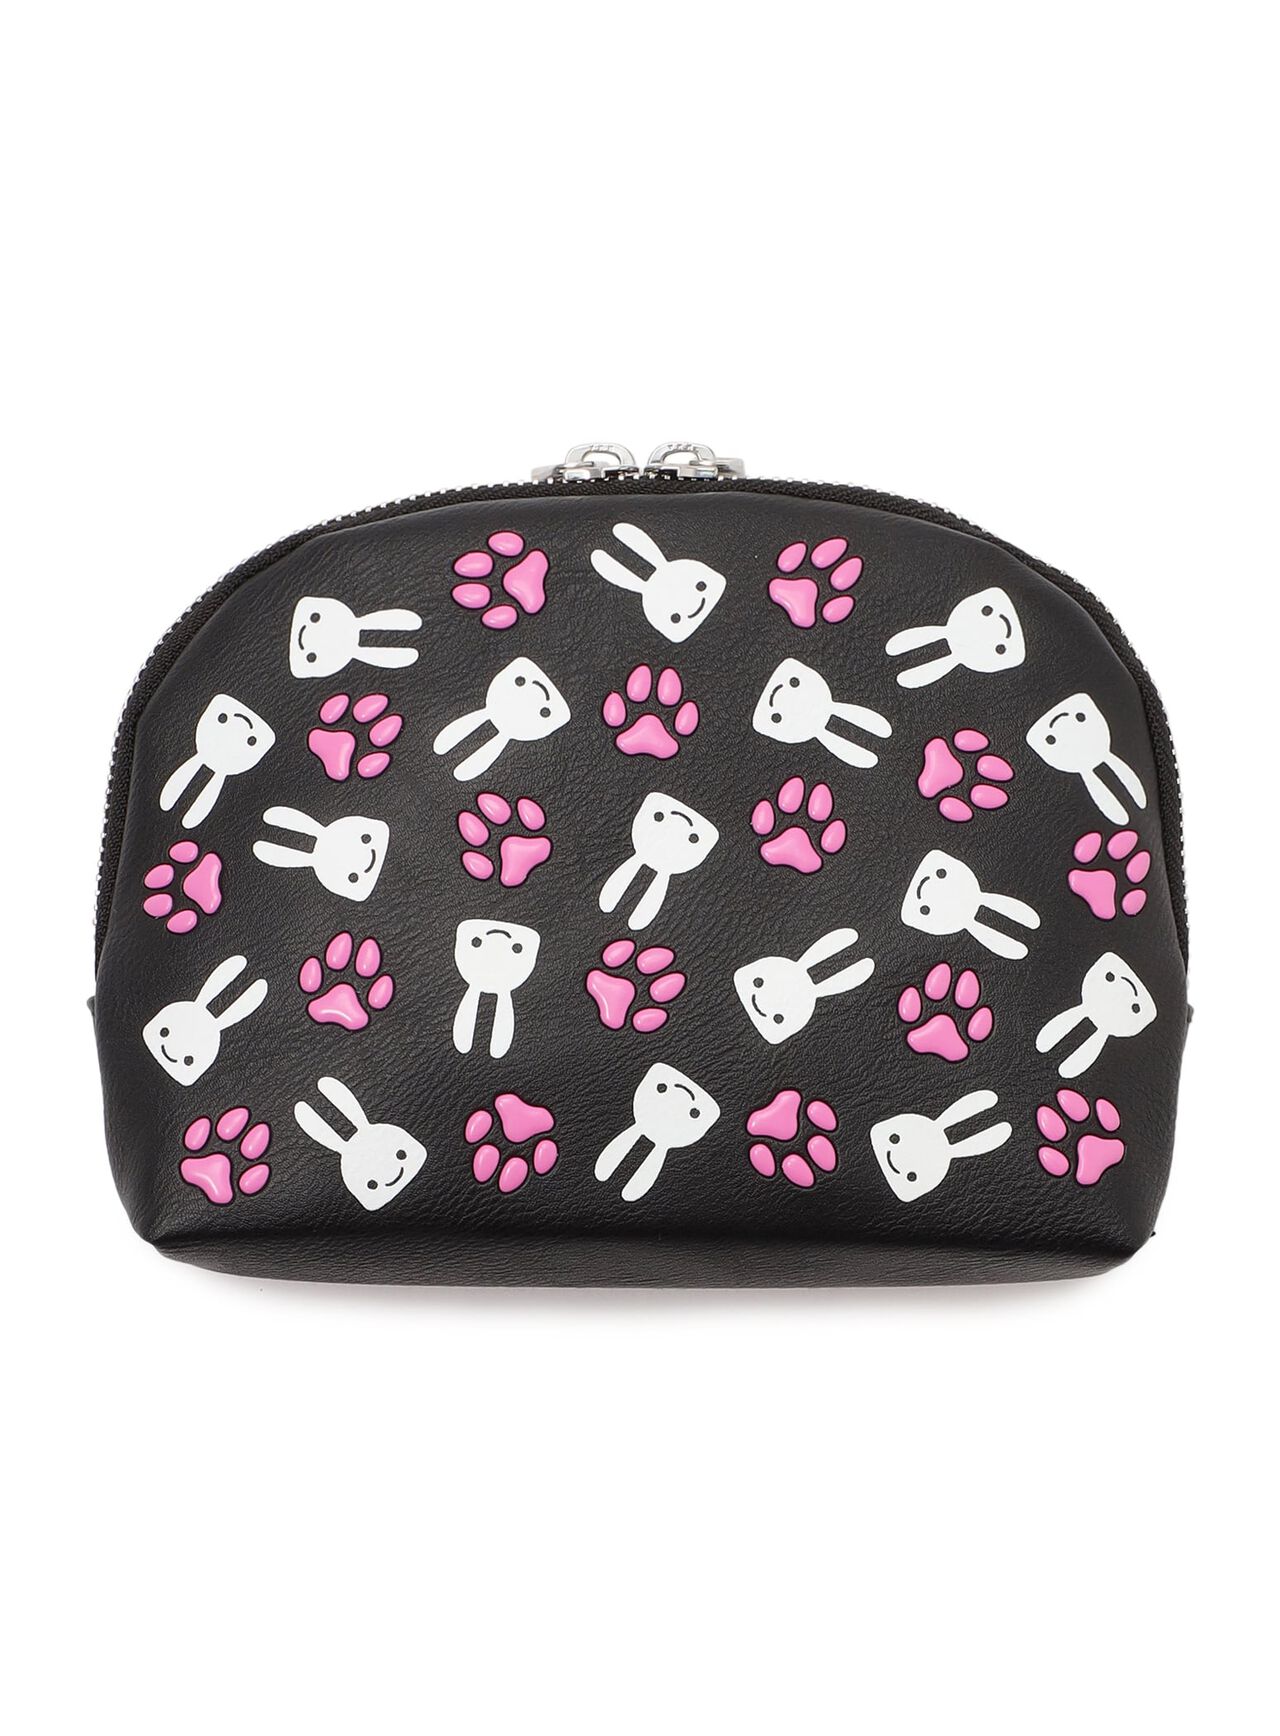 Printed Pouch 29th Paw Pouch,ONE, large image number 0